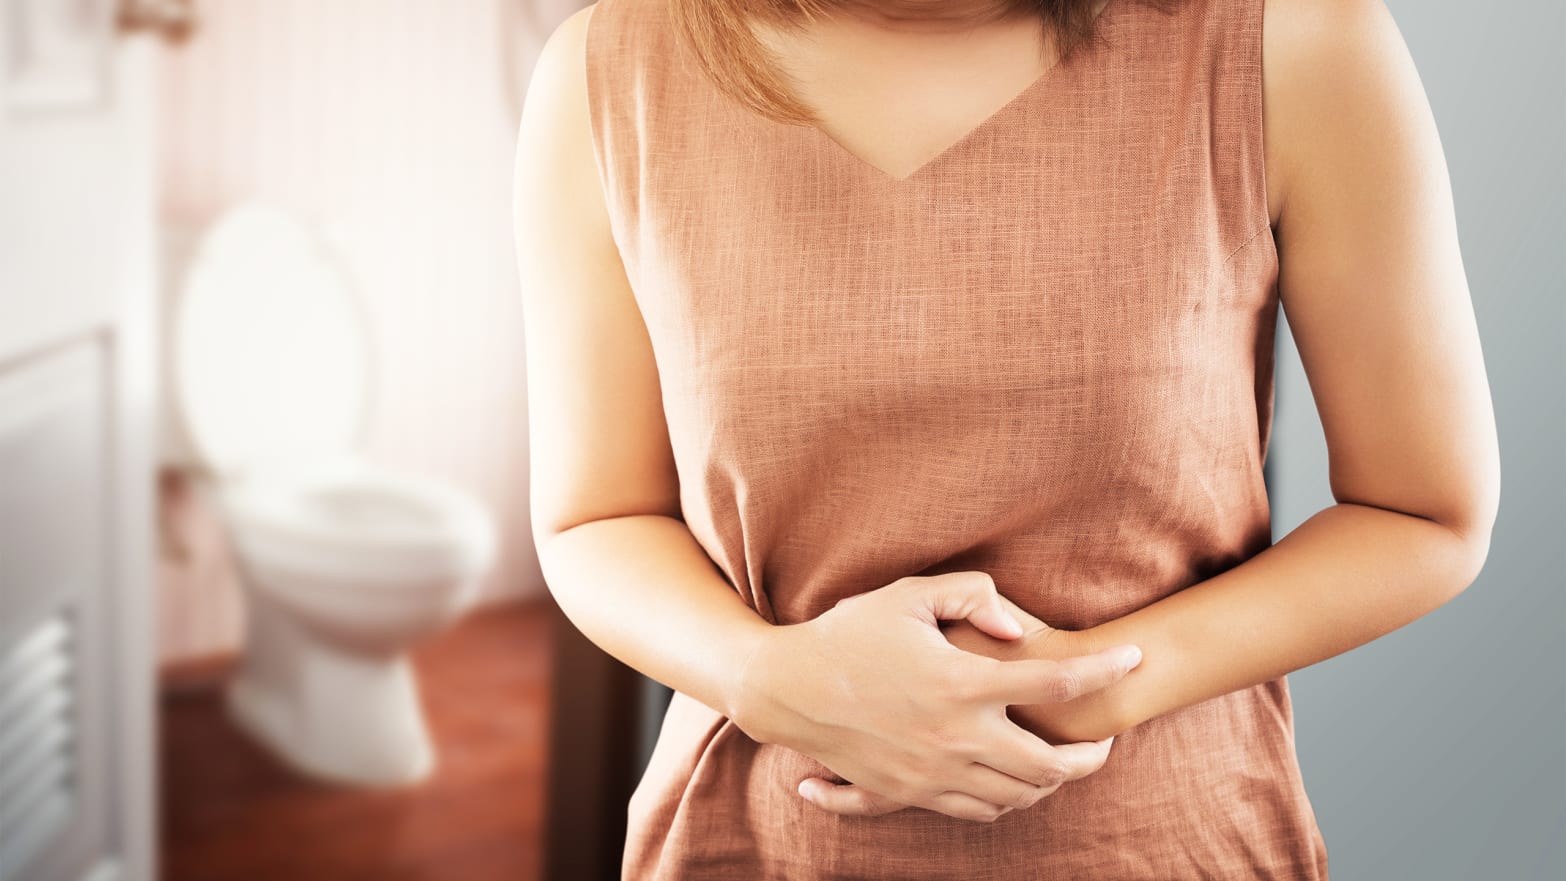 woman clutching stomach in front of toilet american gut project poop crap shit bateria microbiome